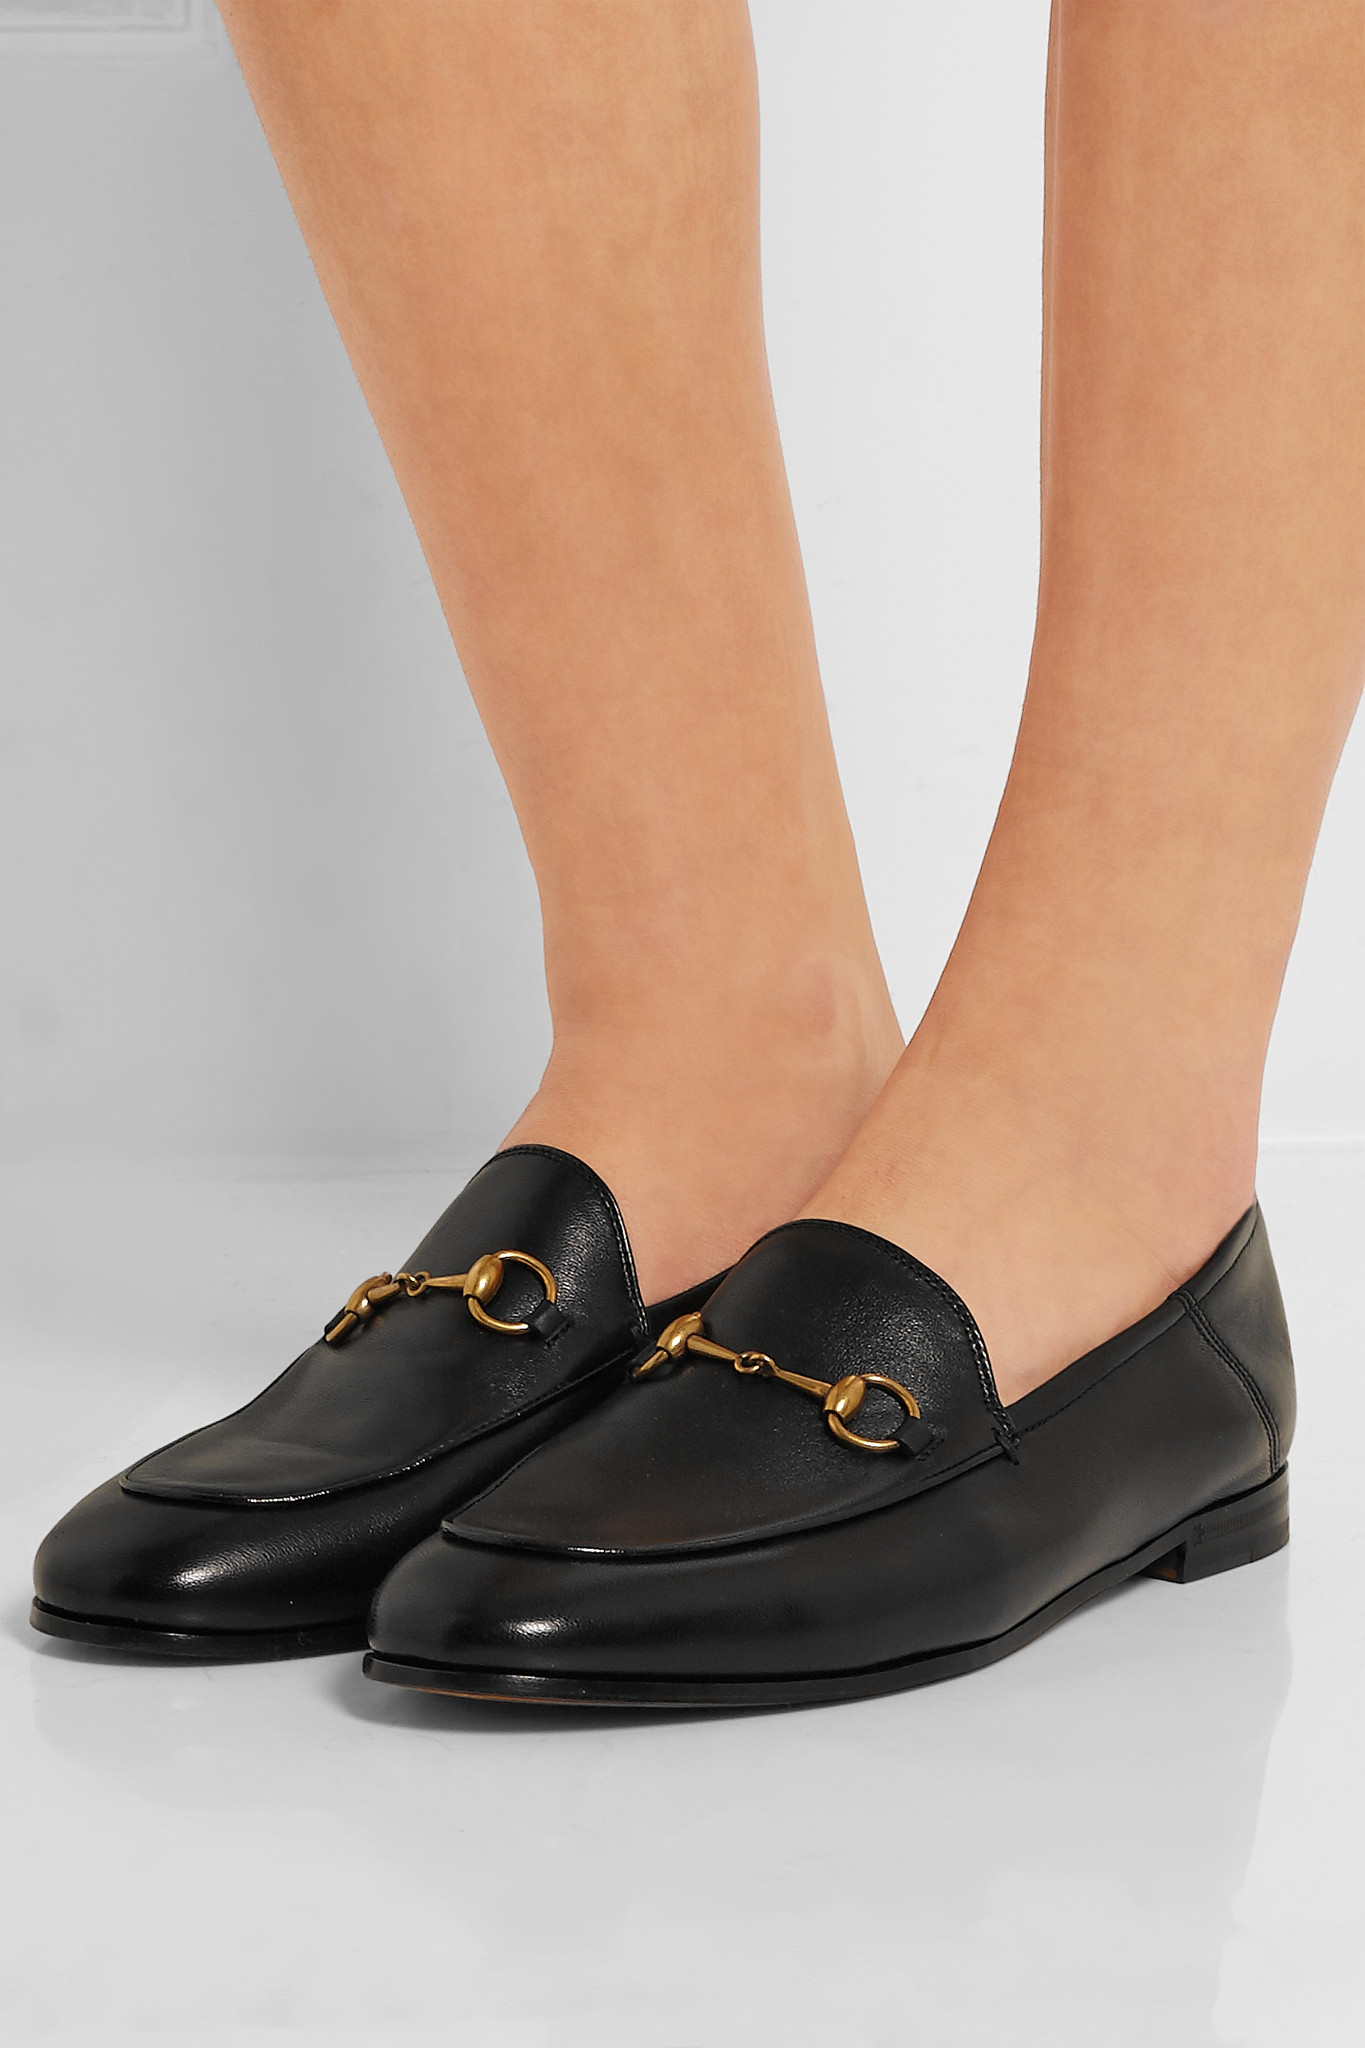 Lyst - Gucci Horsebit-detailed Leather Loafers in Black